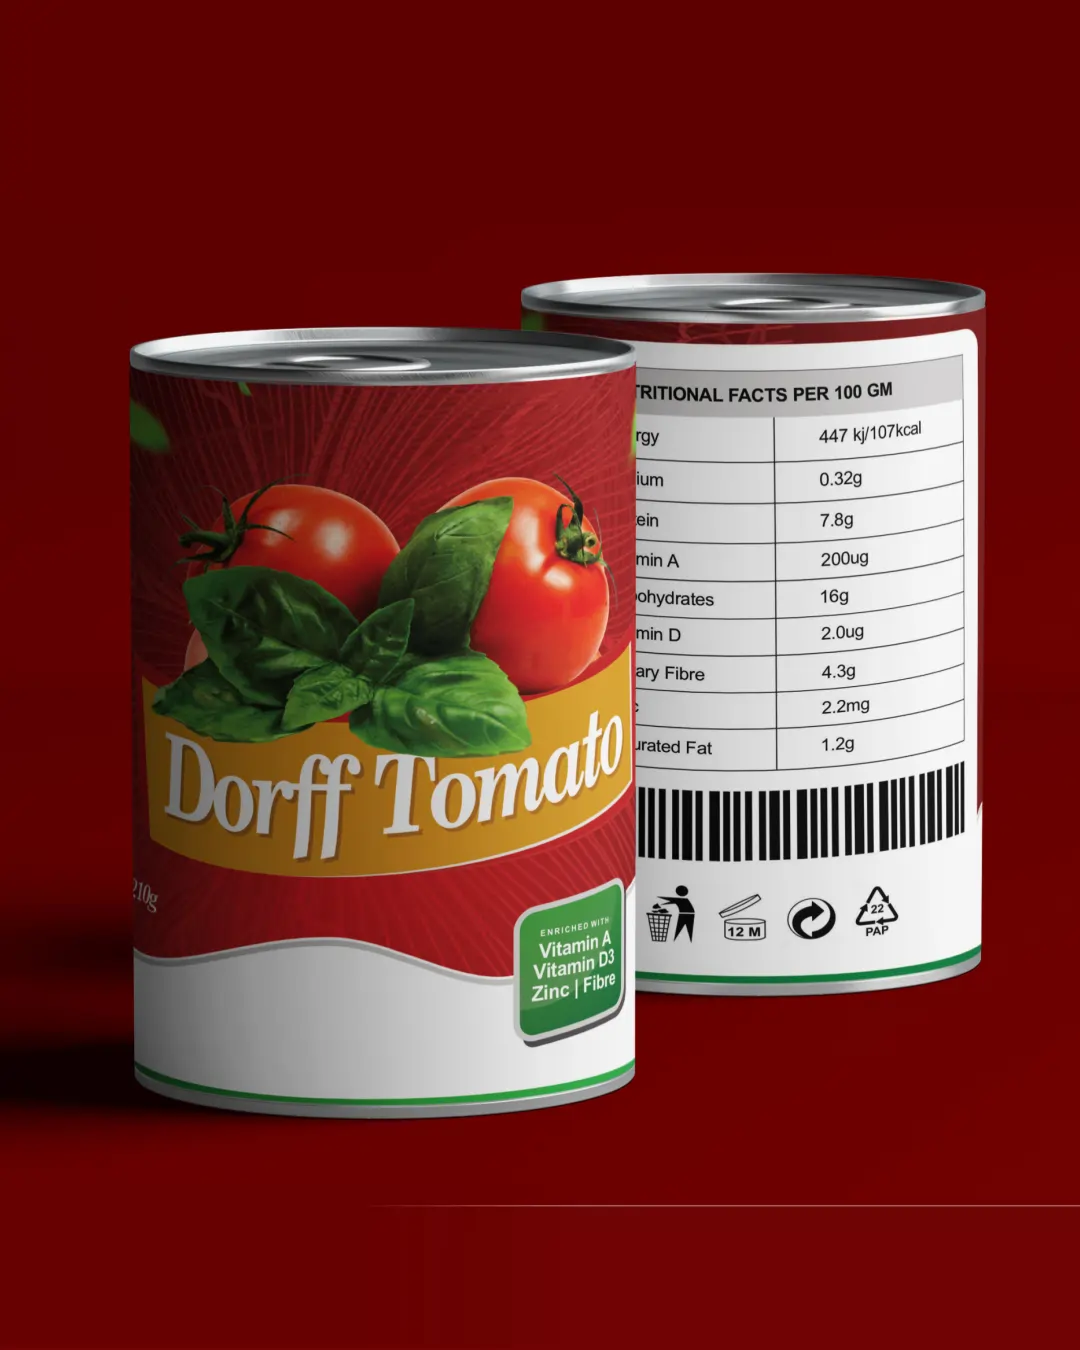 Featured image for “Dorff Tomato Tin”